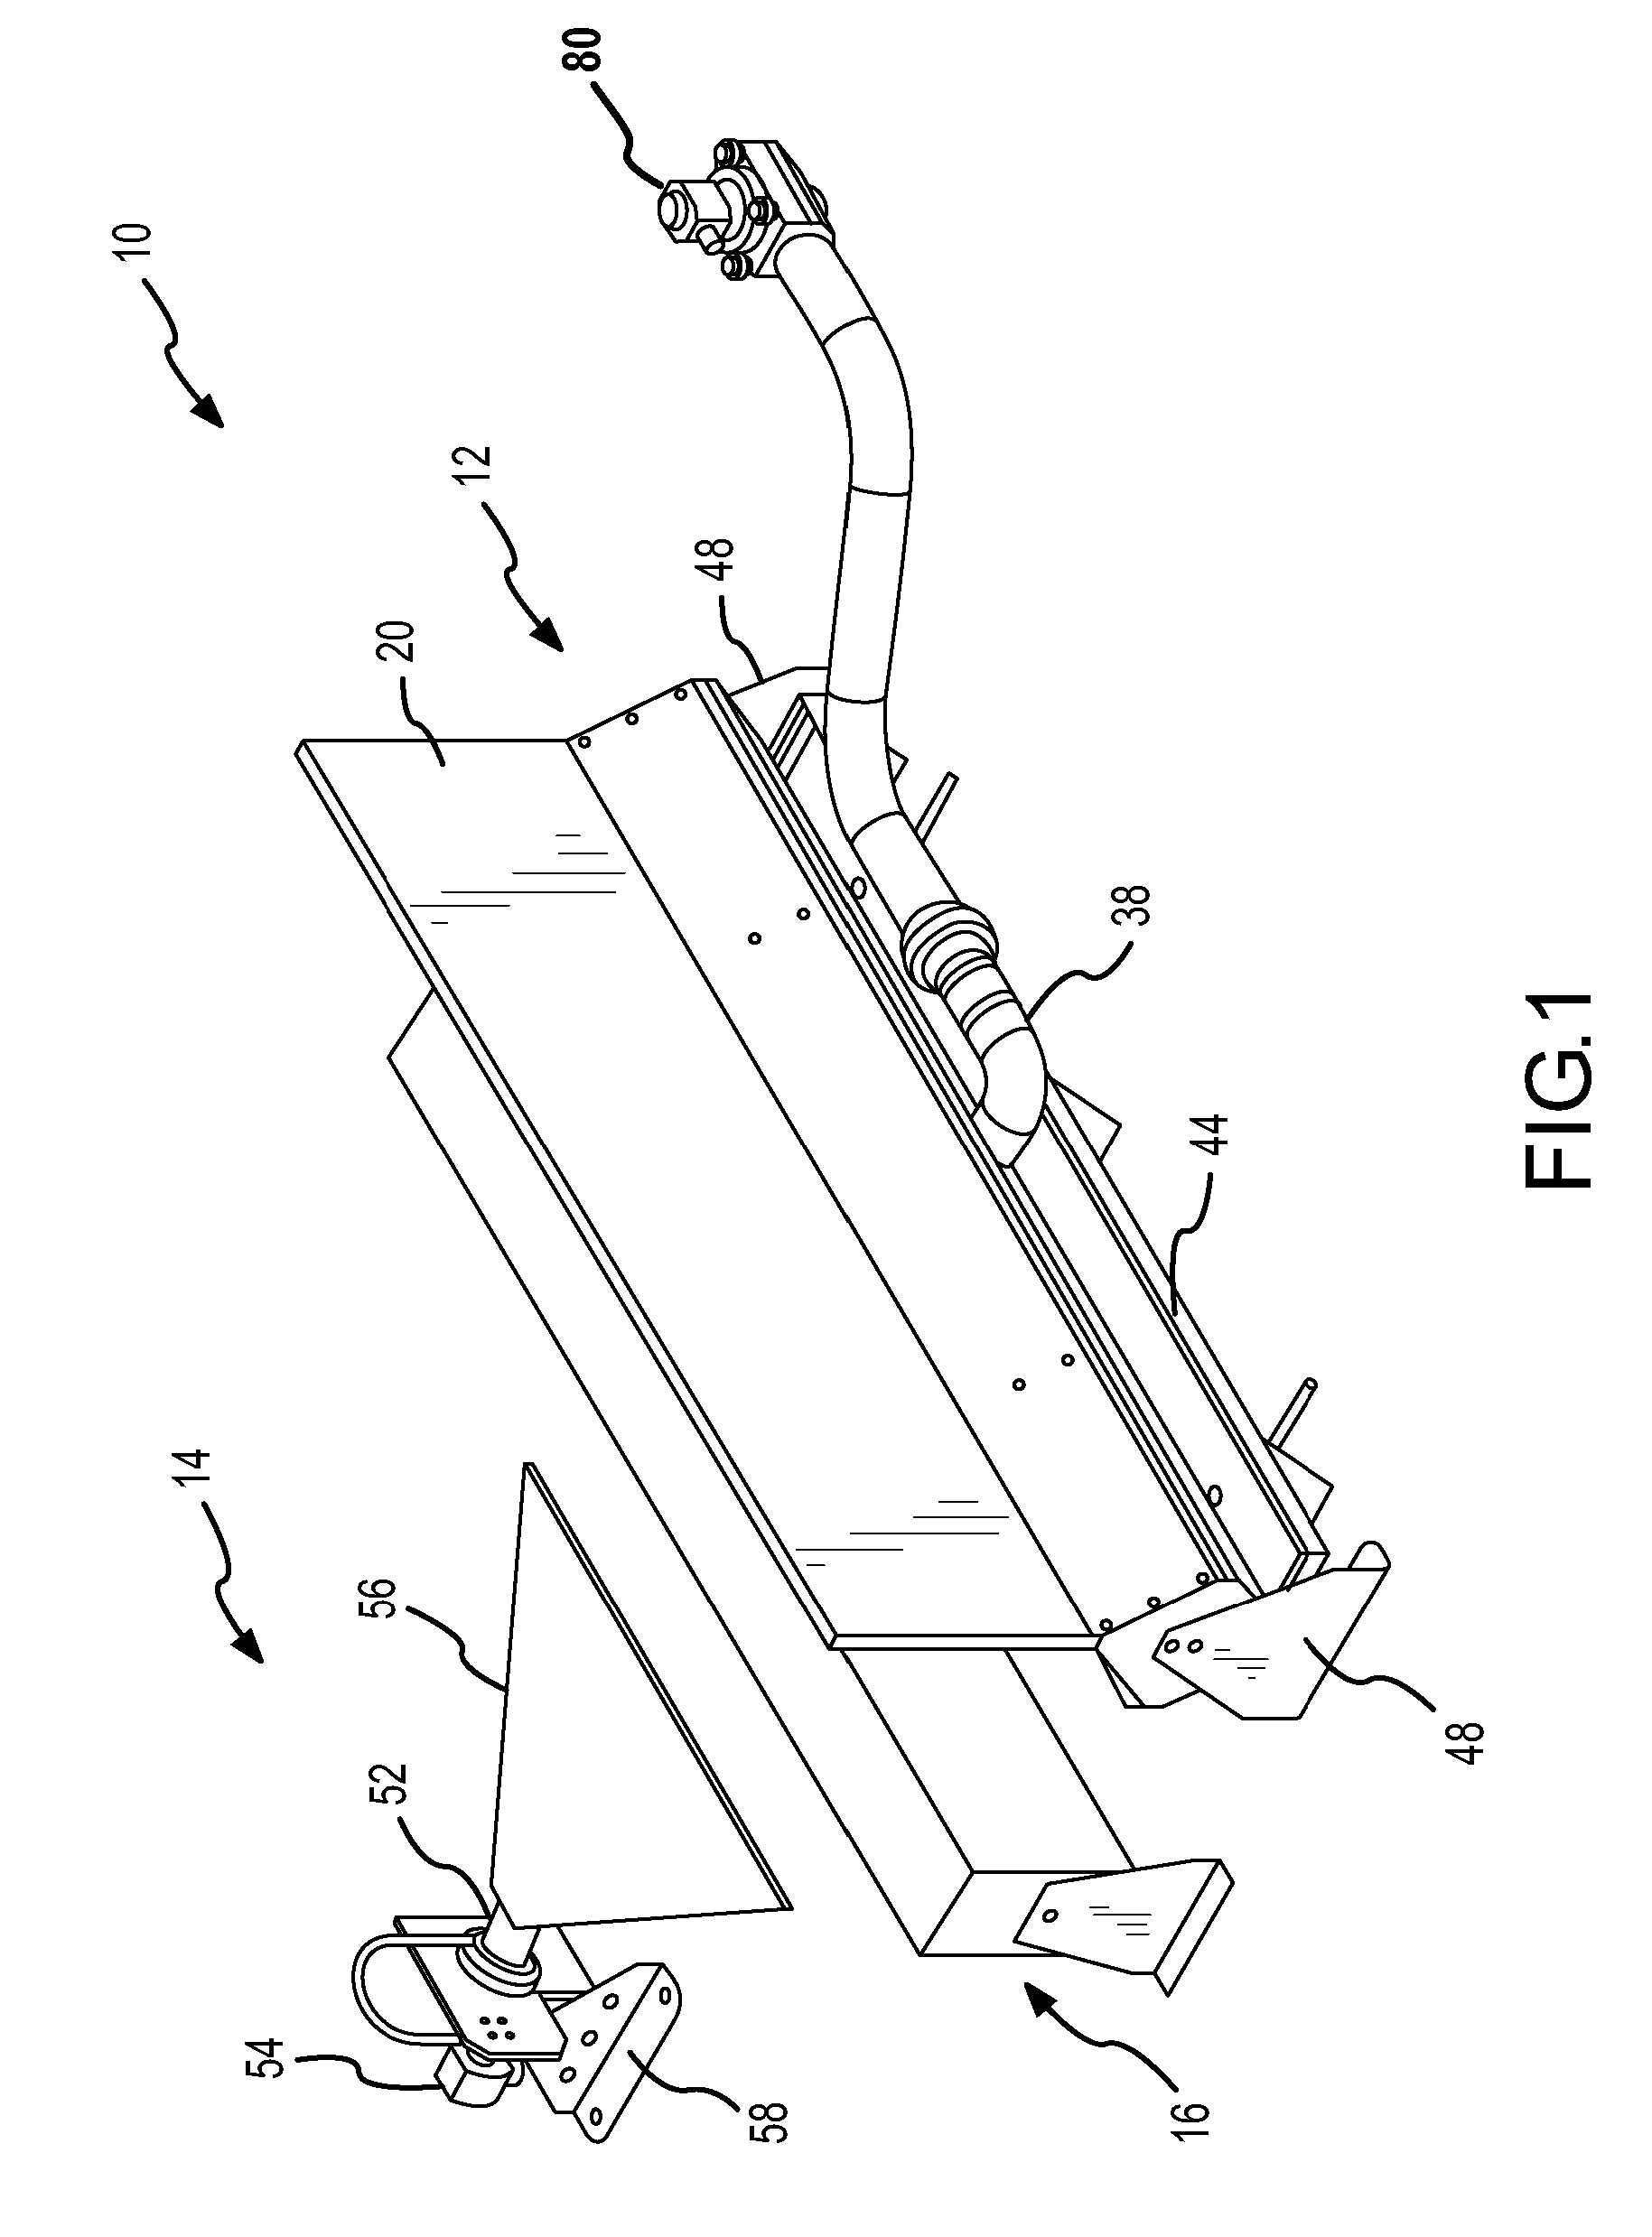 Apparatus for Producing a Fire Special Effect